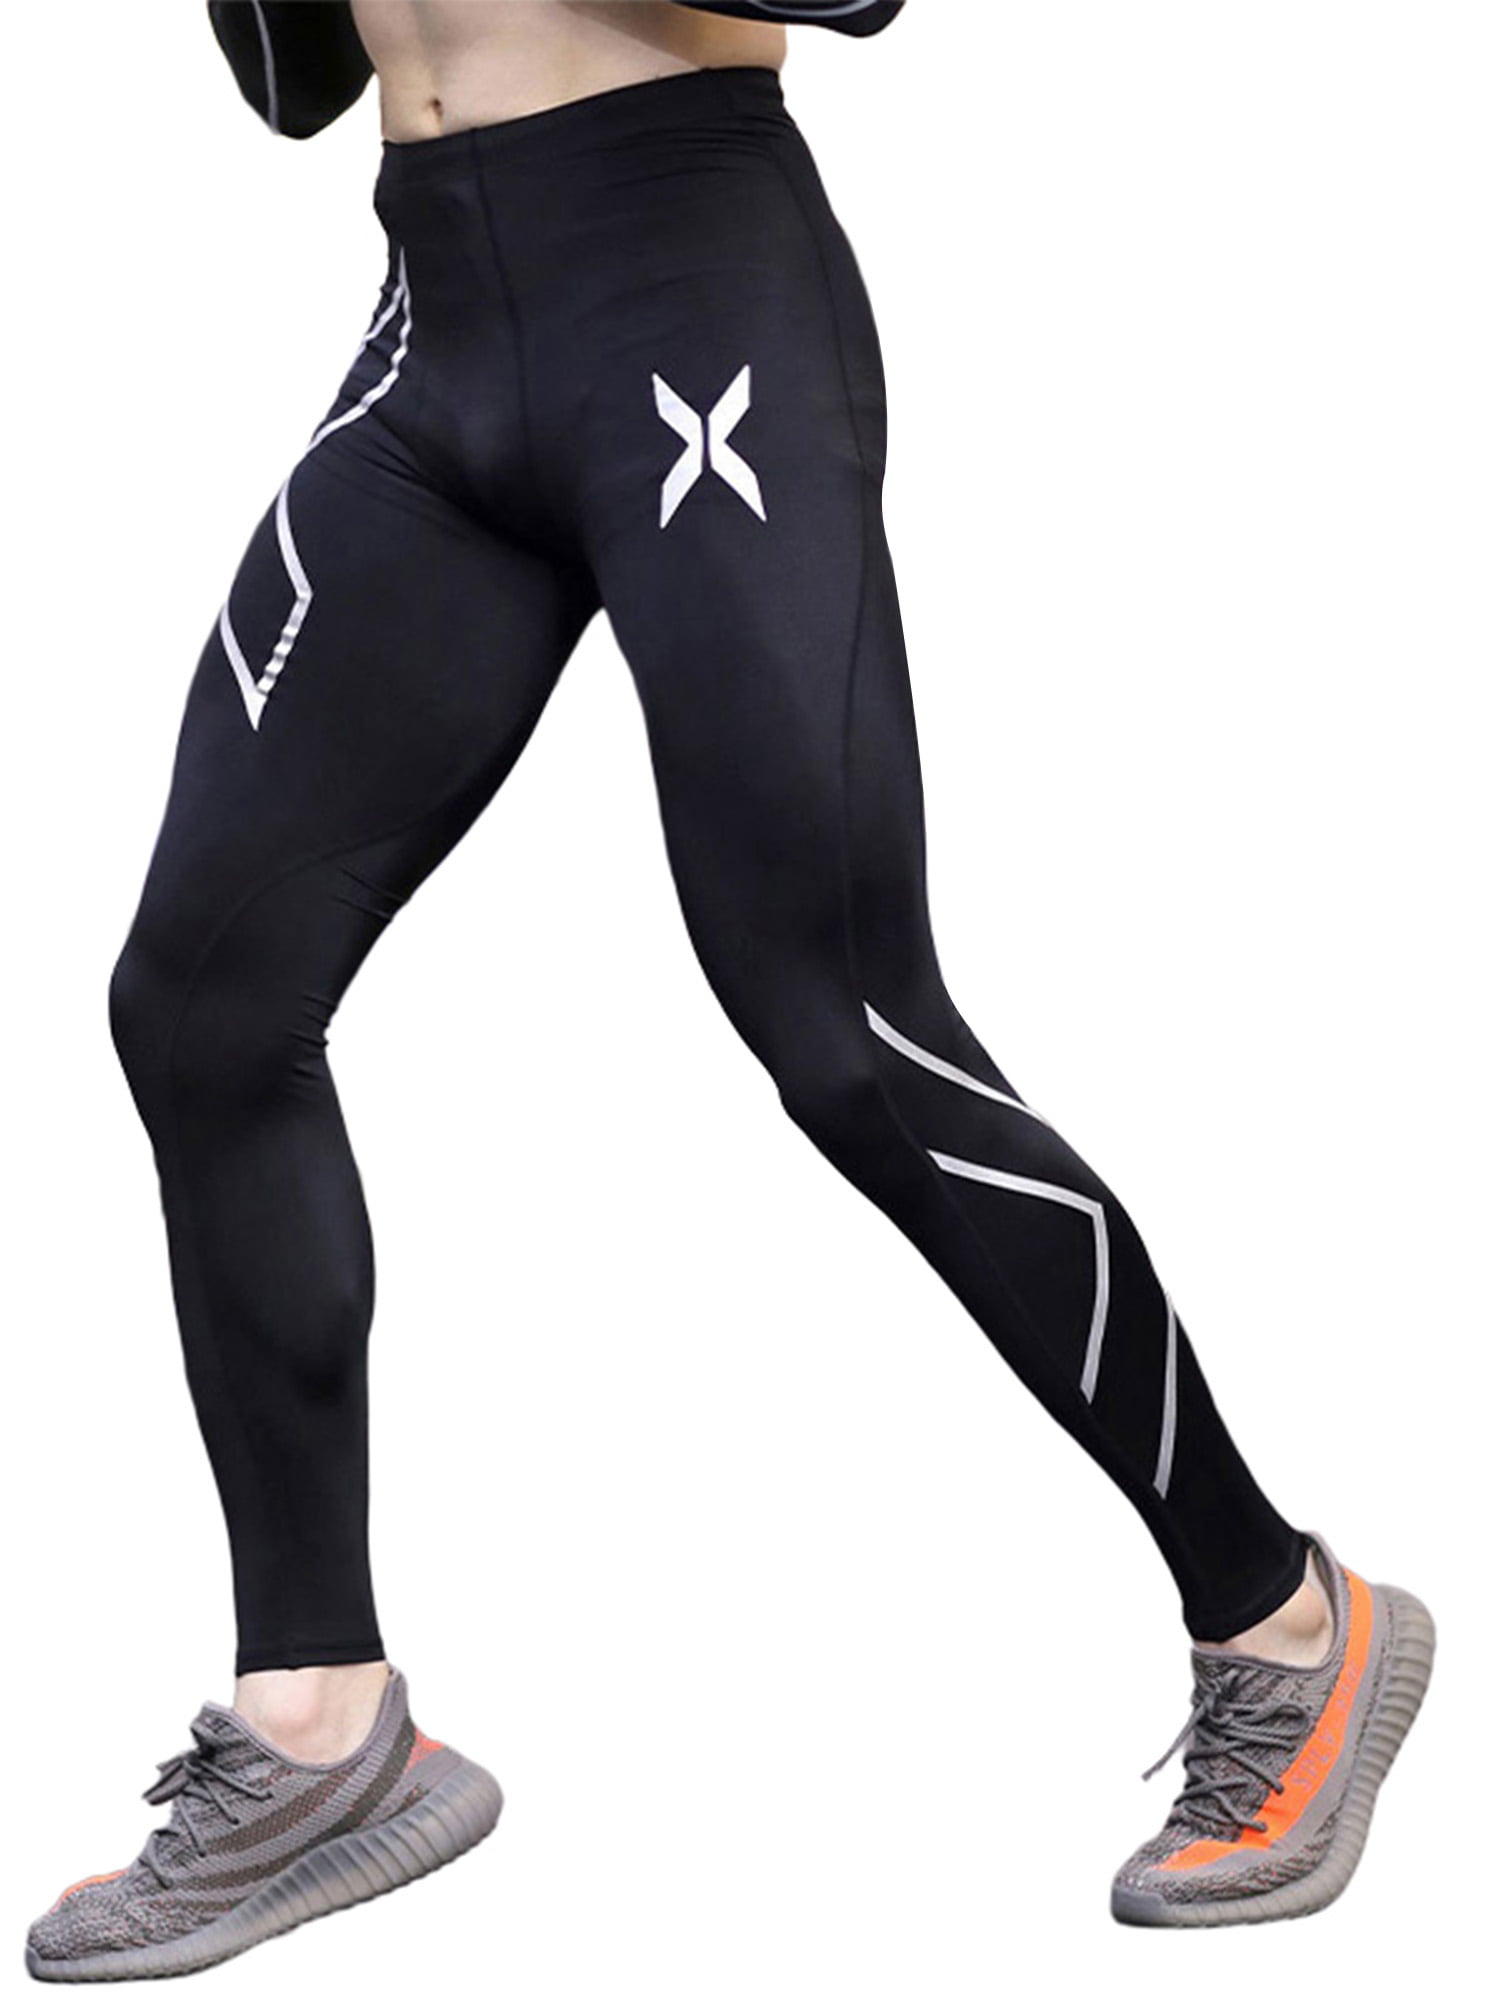 Ffox Mens Sports Training Compression Stretch Dry Tights Running Pants